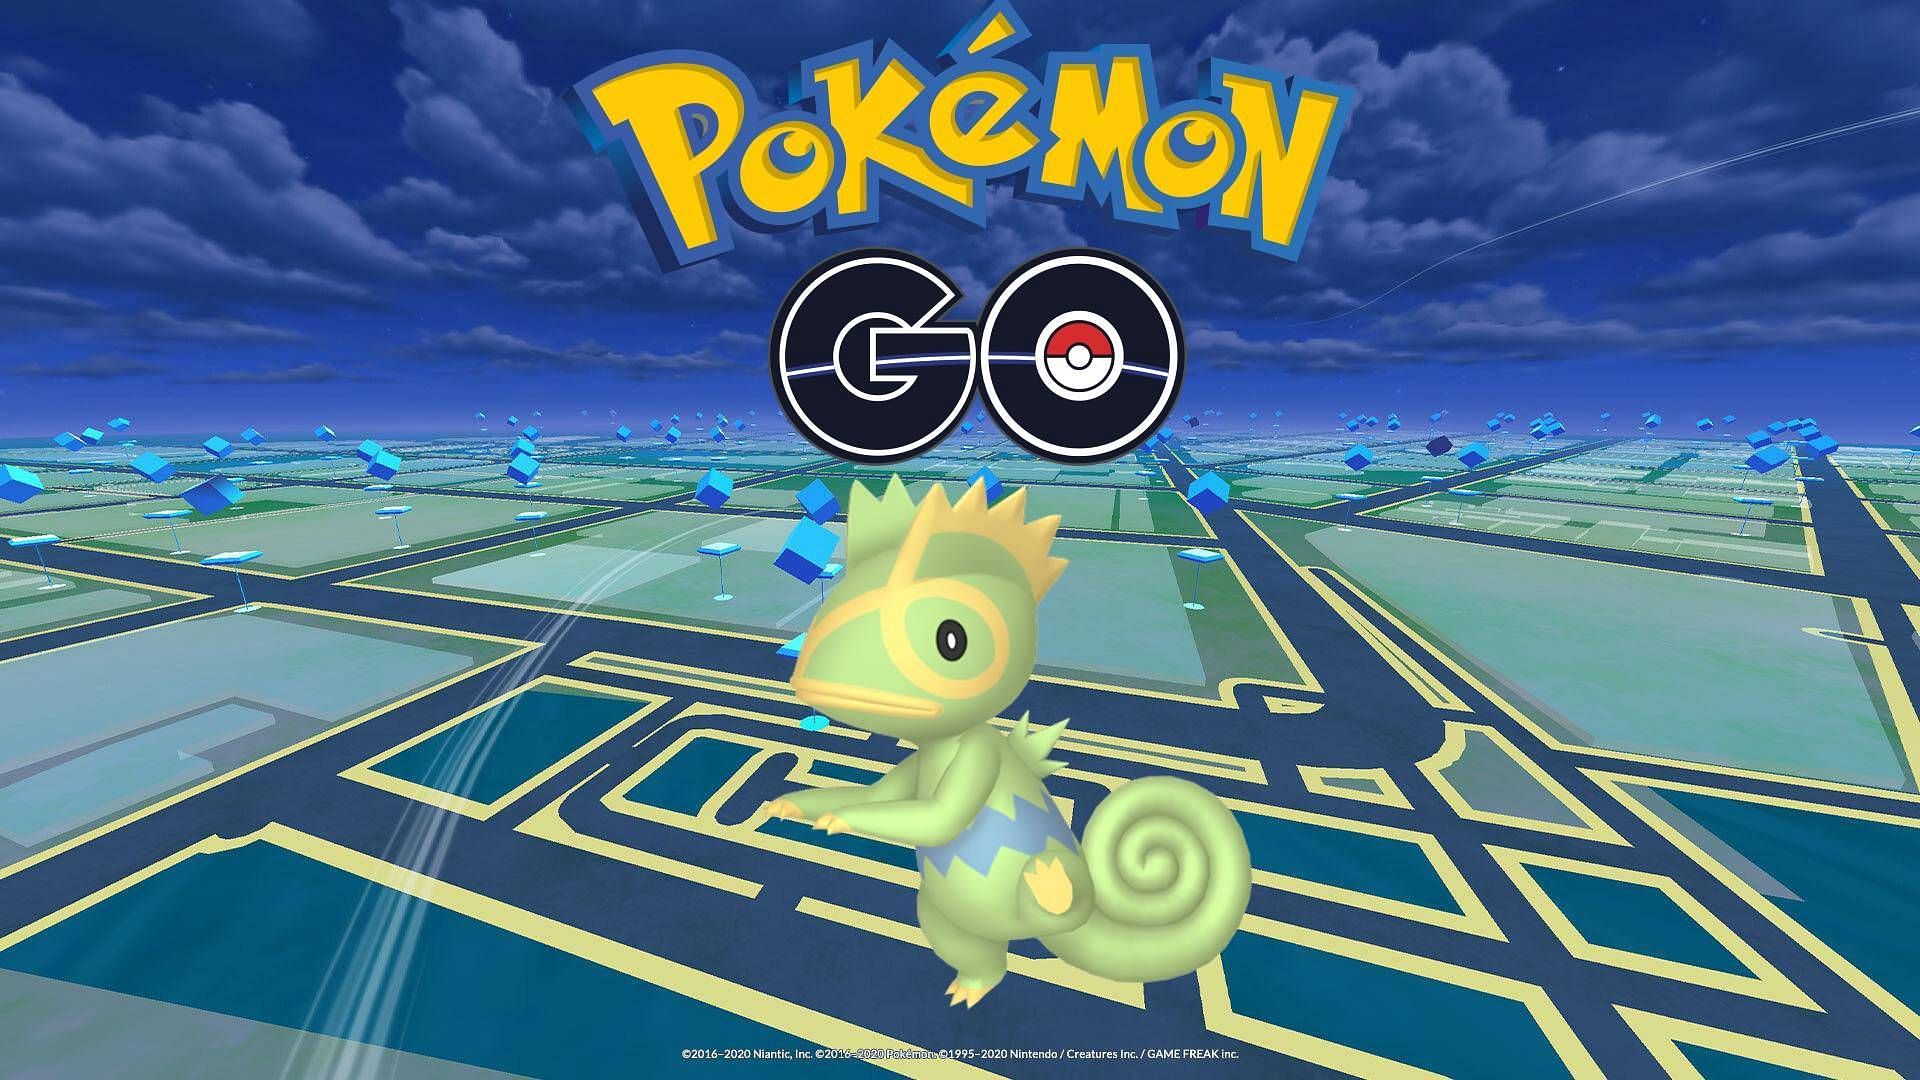 How to catch Kecleon in Pokemon GO as it reportedly makes its long-awaited  debut?